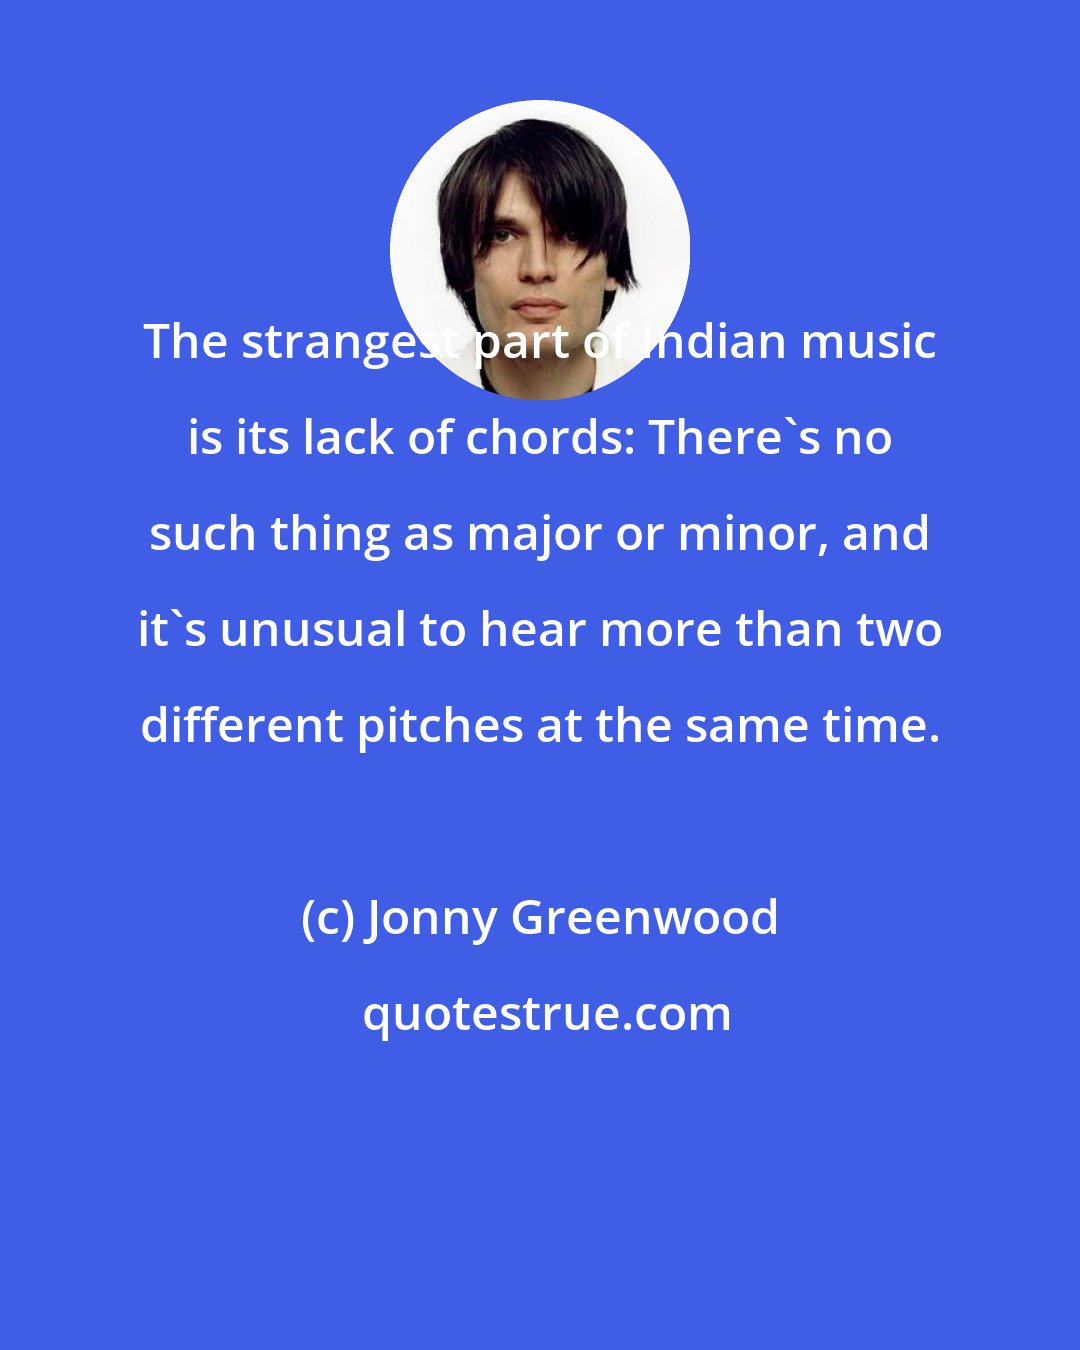 Jonny Greenwood: The strangest part of Indian music is its lack of chords: There's no such thing as major or minor, and it's unusual to hear more than two different pitches at the same time.